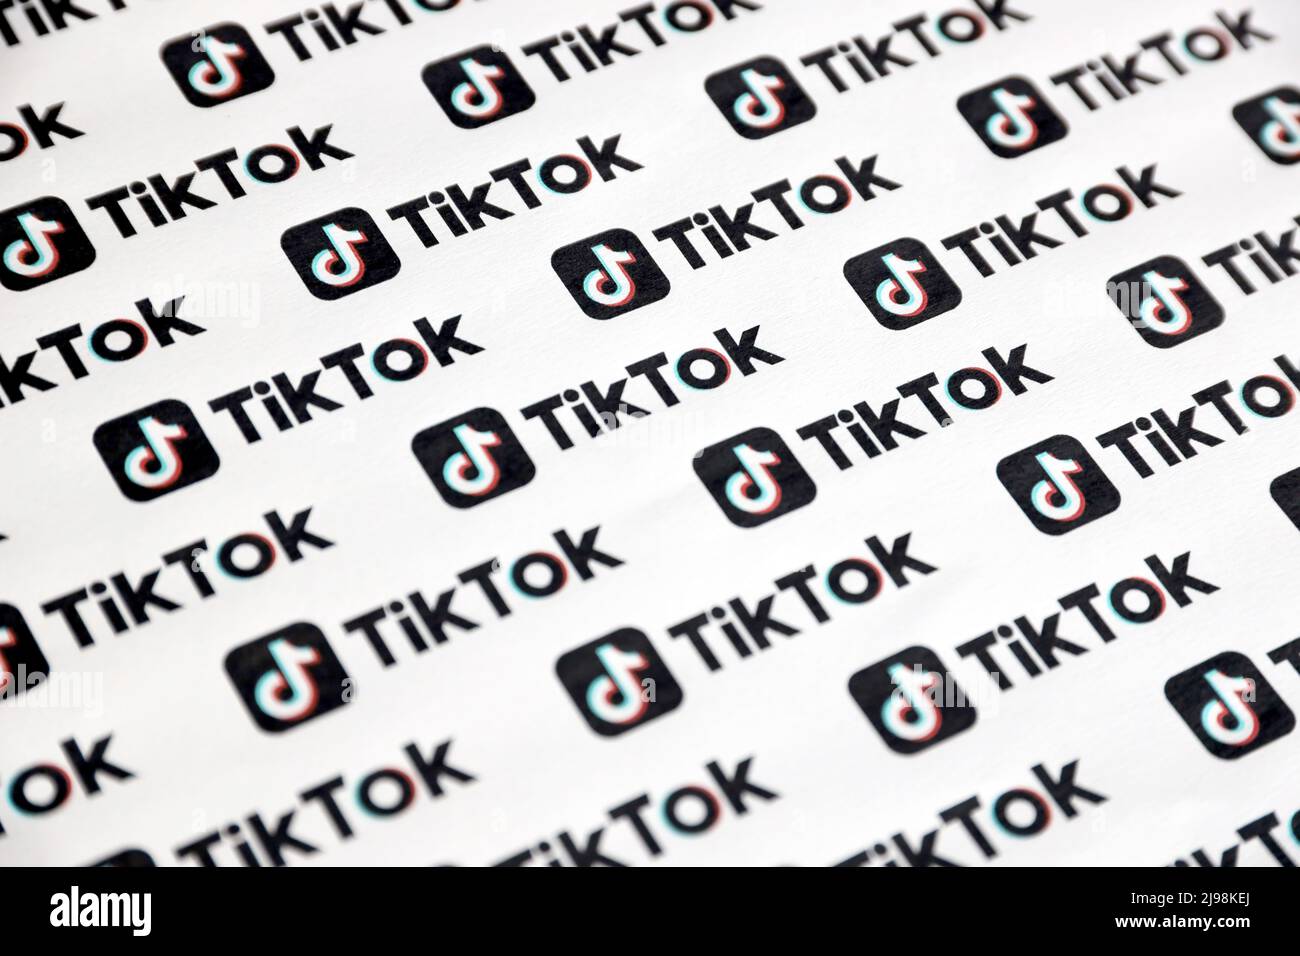 TERNOPIL, UKRAINE - MAY 2, 2022: Many TikTok logo printed on paper. Tiktok or Douyin is a famous Chinese short-form video hosting service owned by Byt Stock Photo